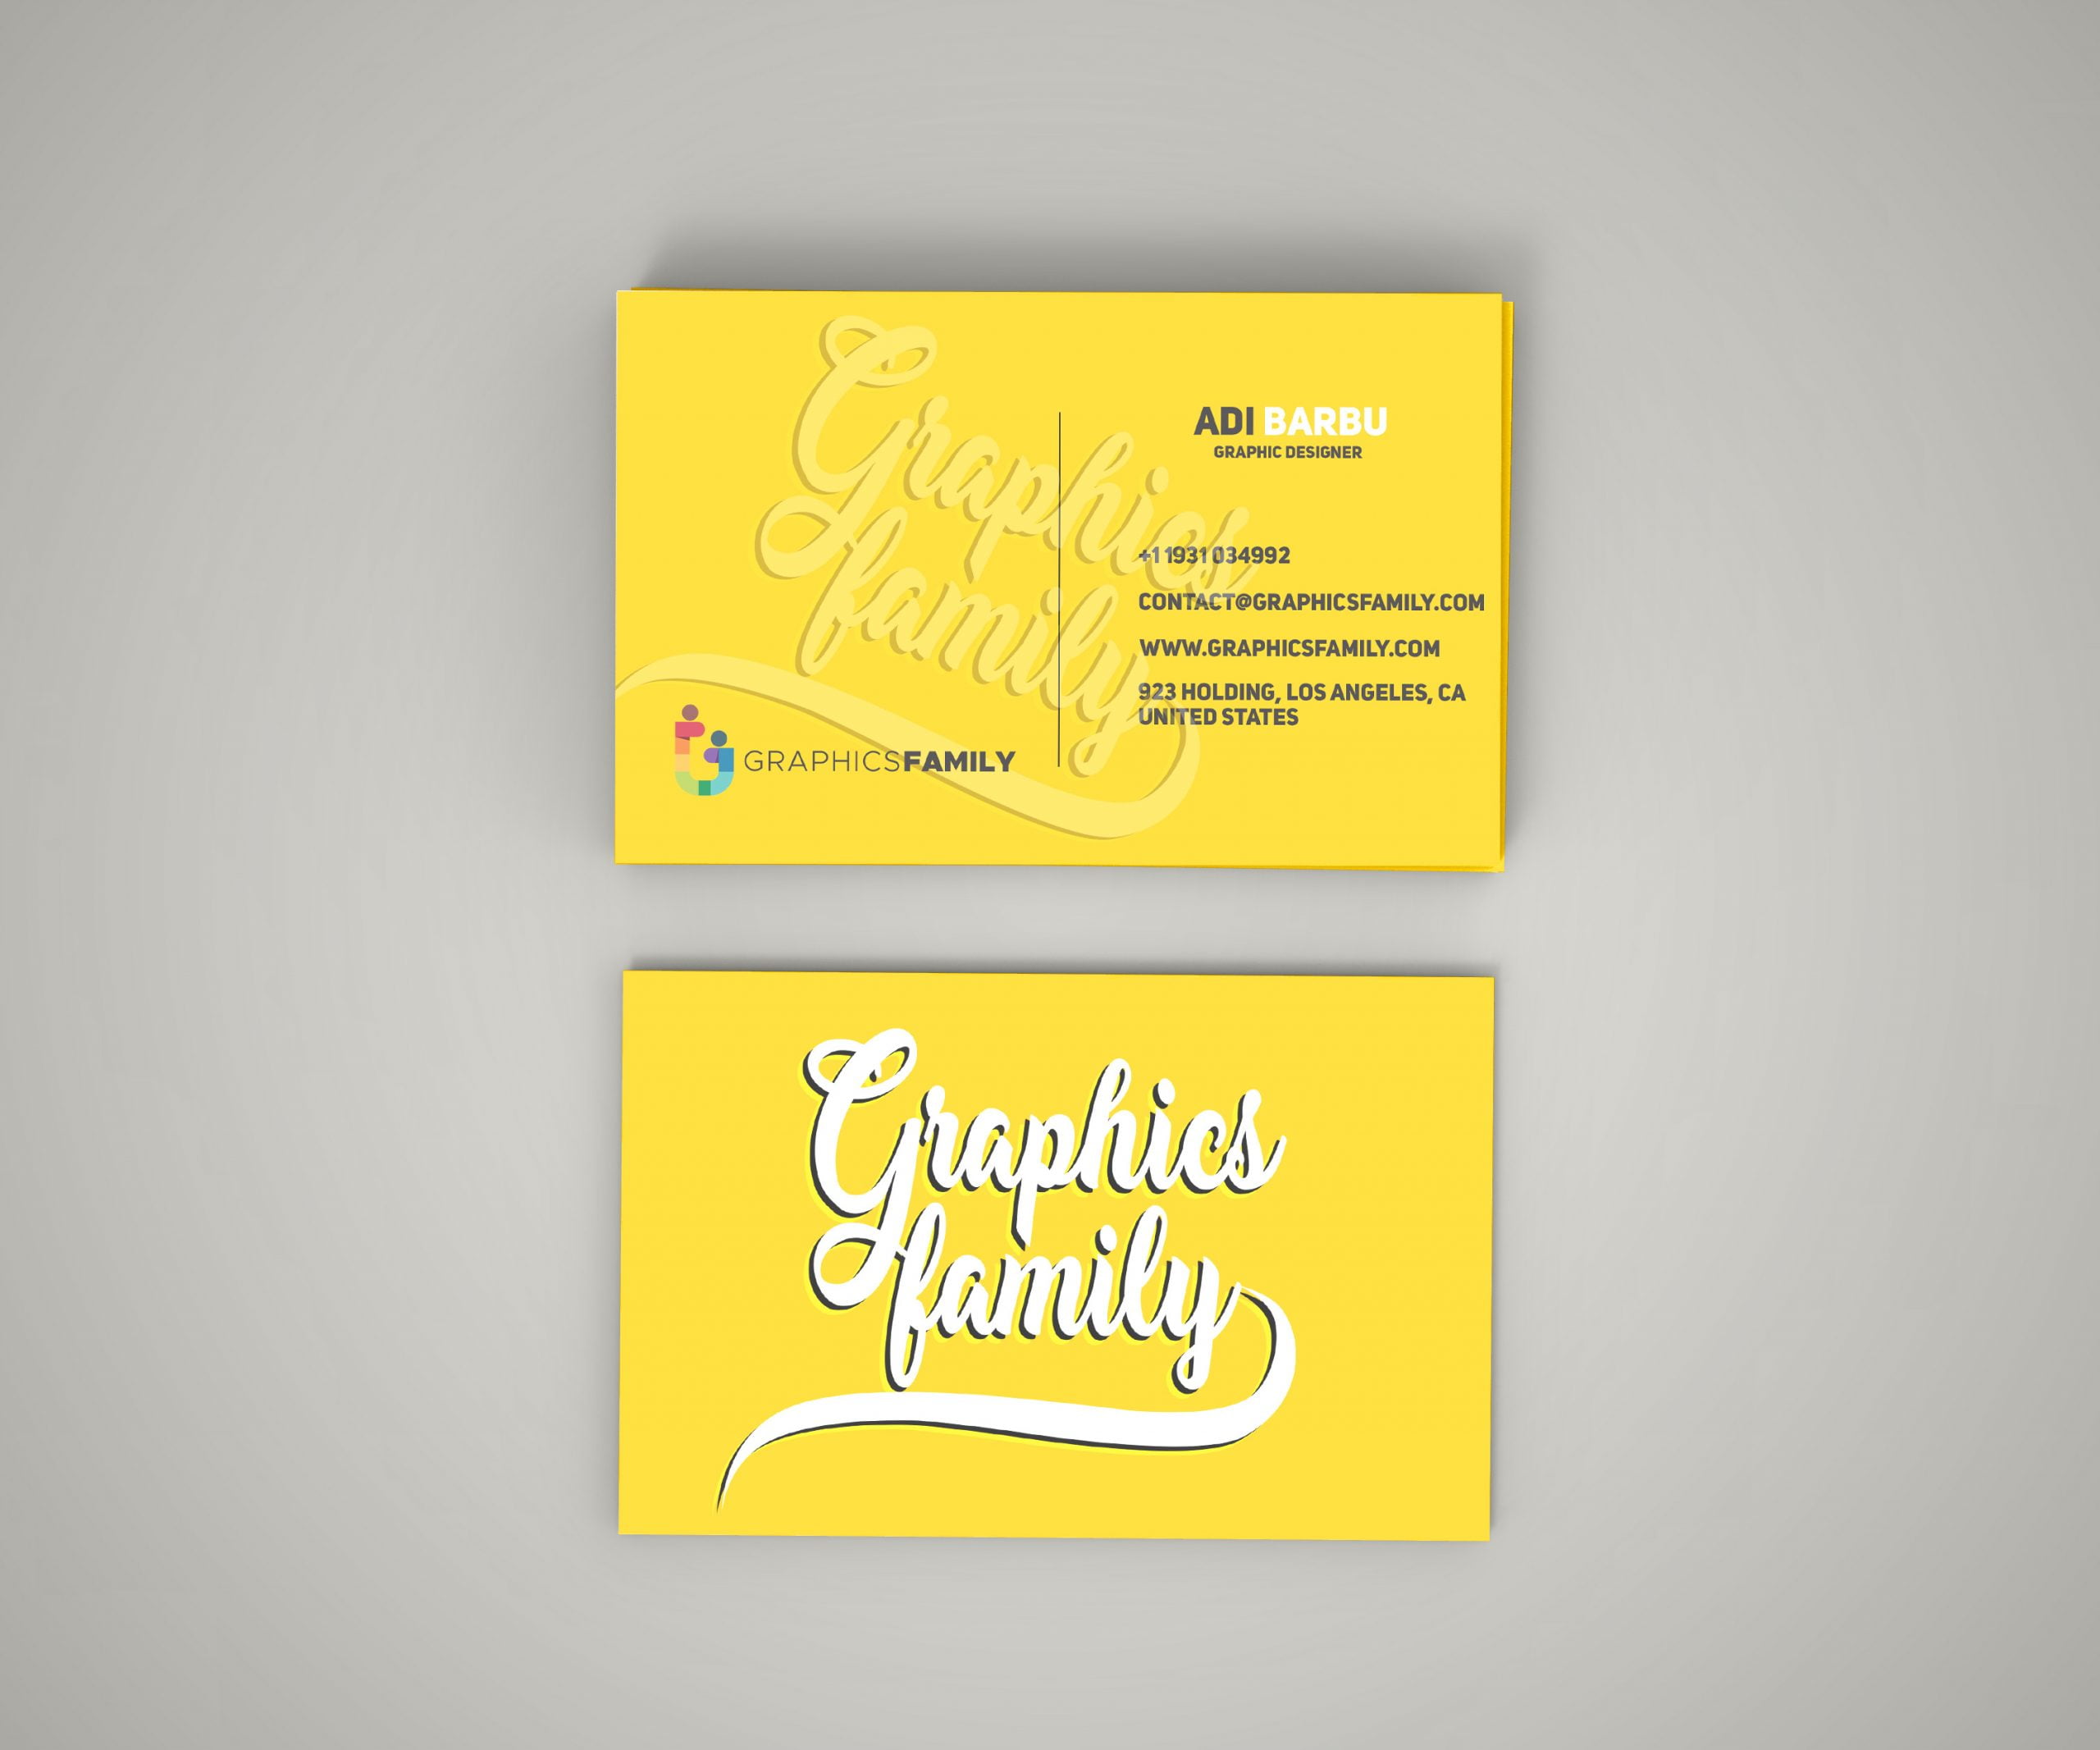 Business Card Mockup by GraphicsFamily